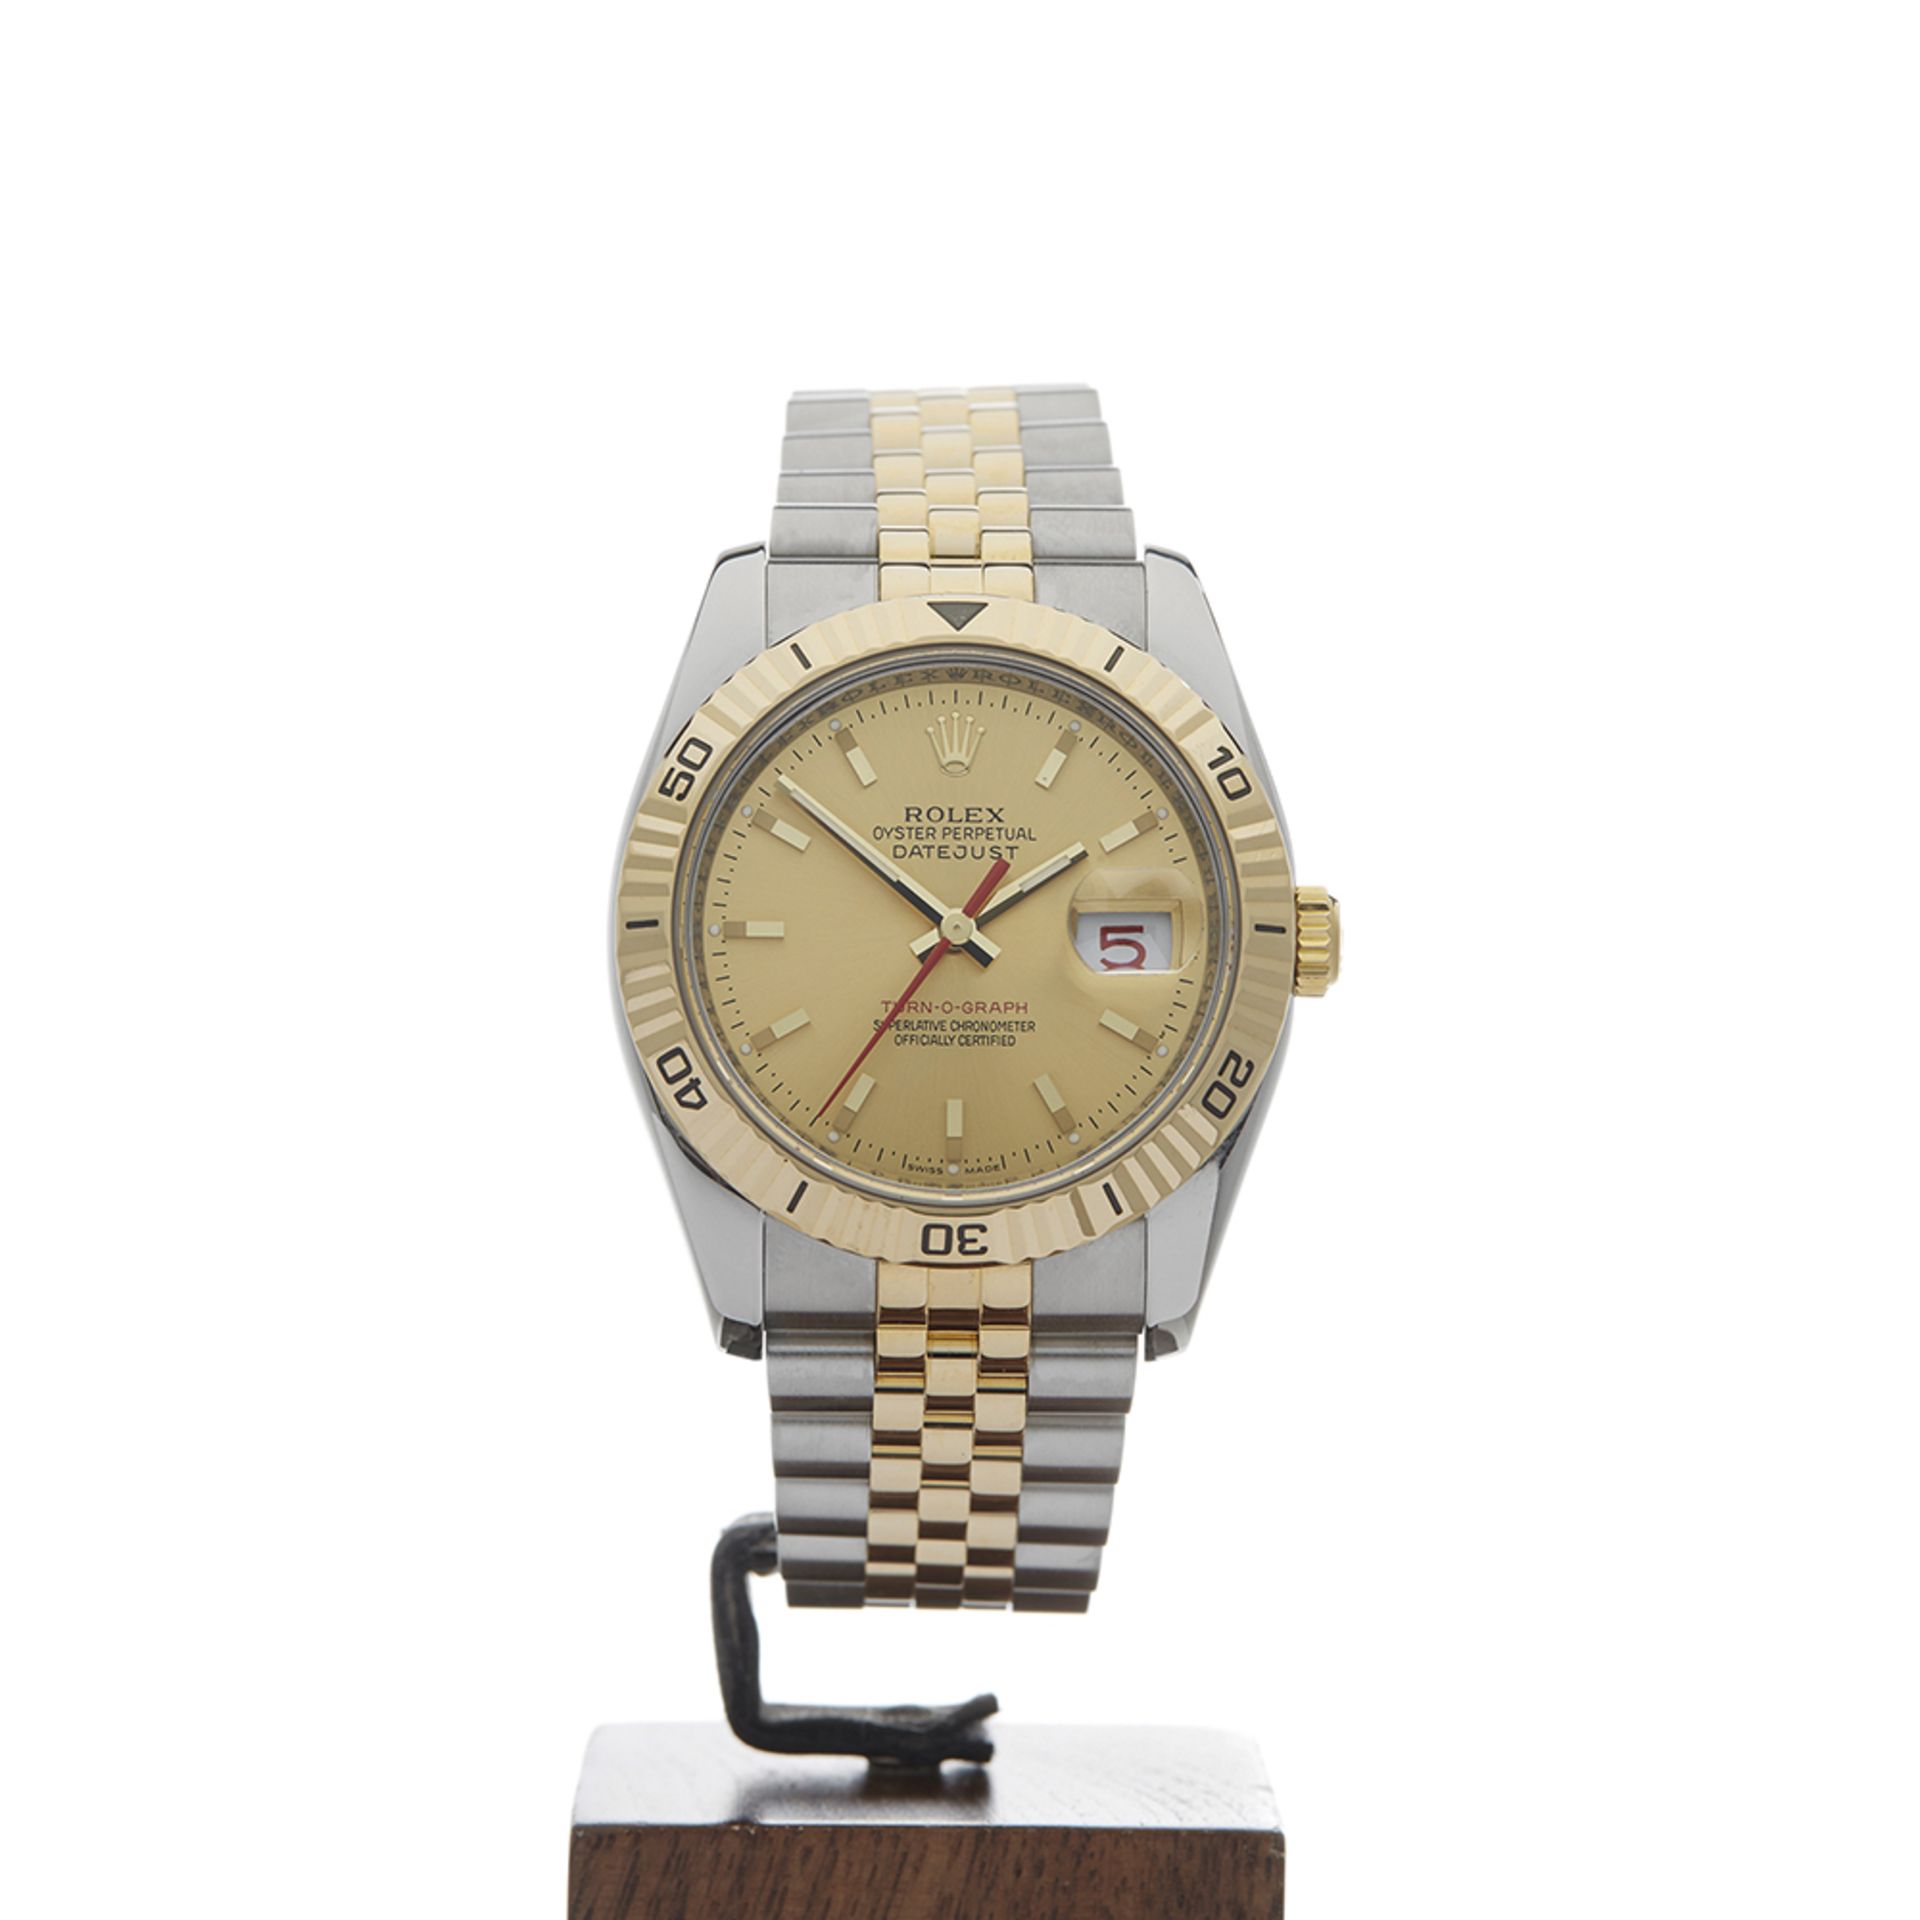 Datejust Turn-o-graph 36mm Stainless Steel & 18k Yellow Gold - 116263 - Image 2 of 9